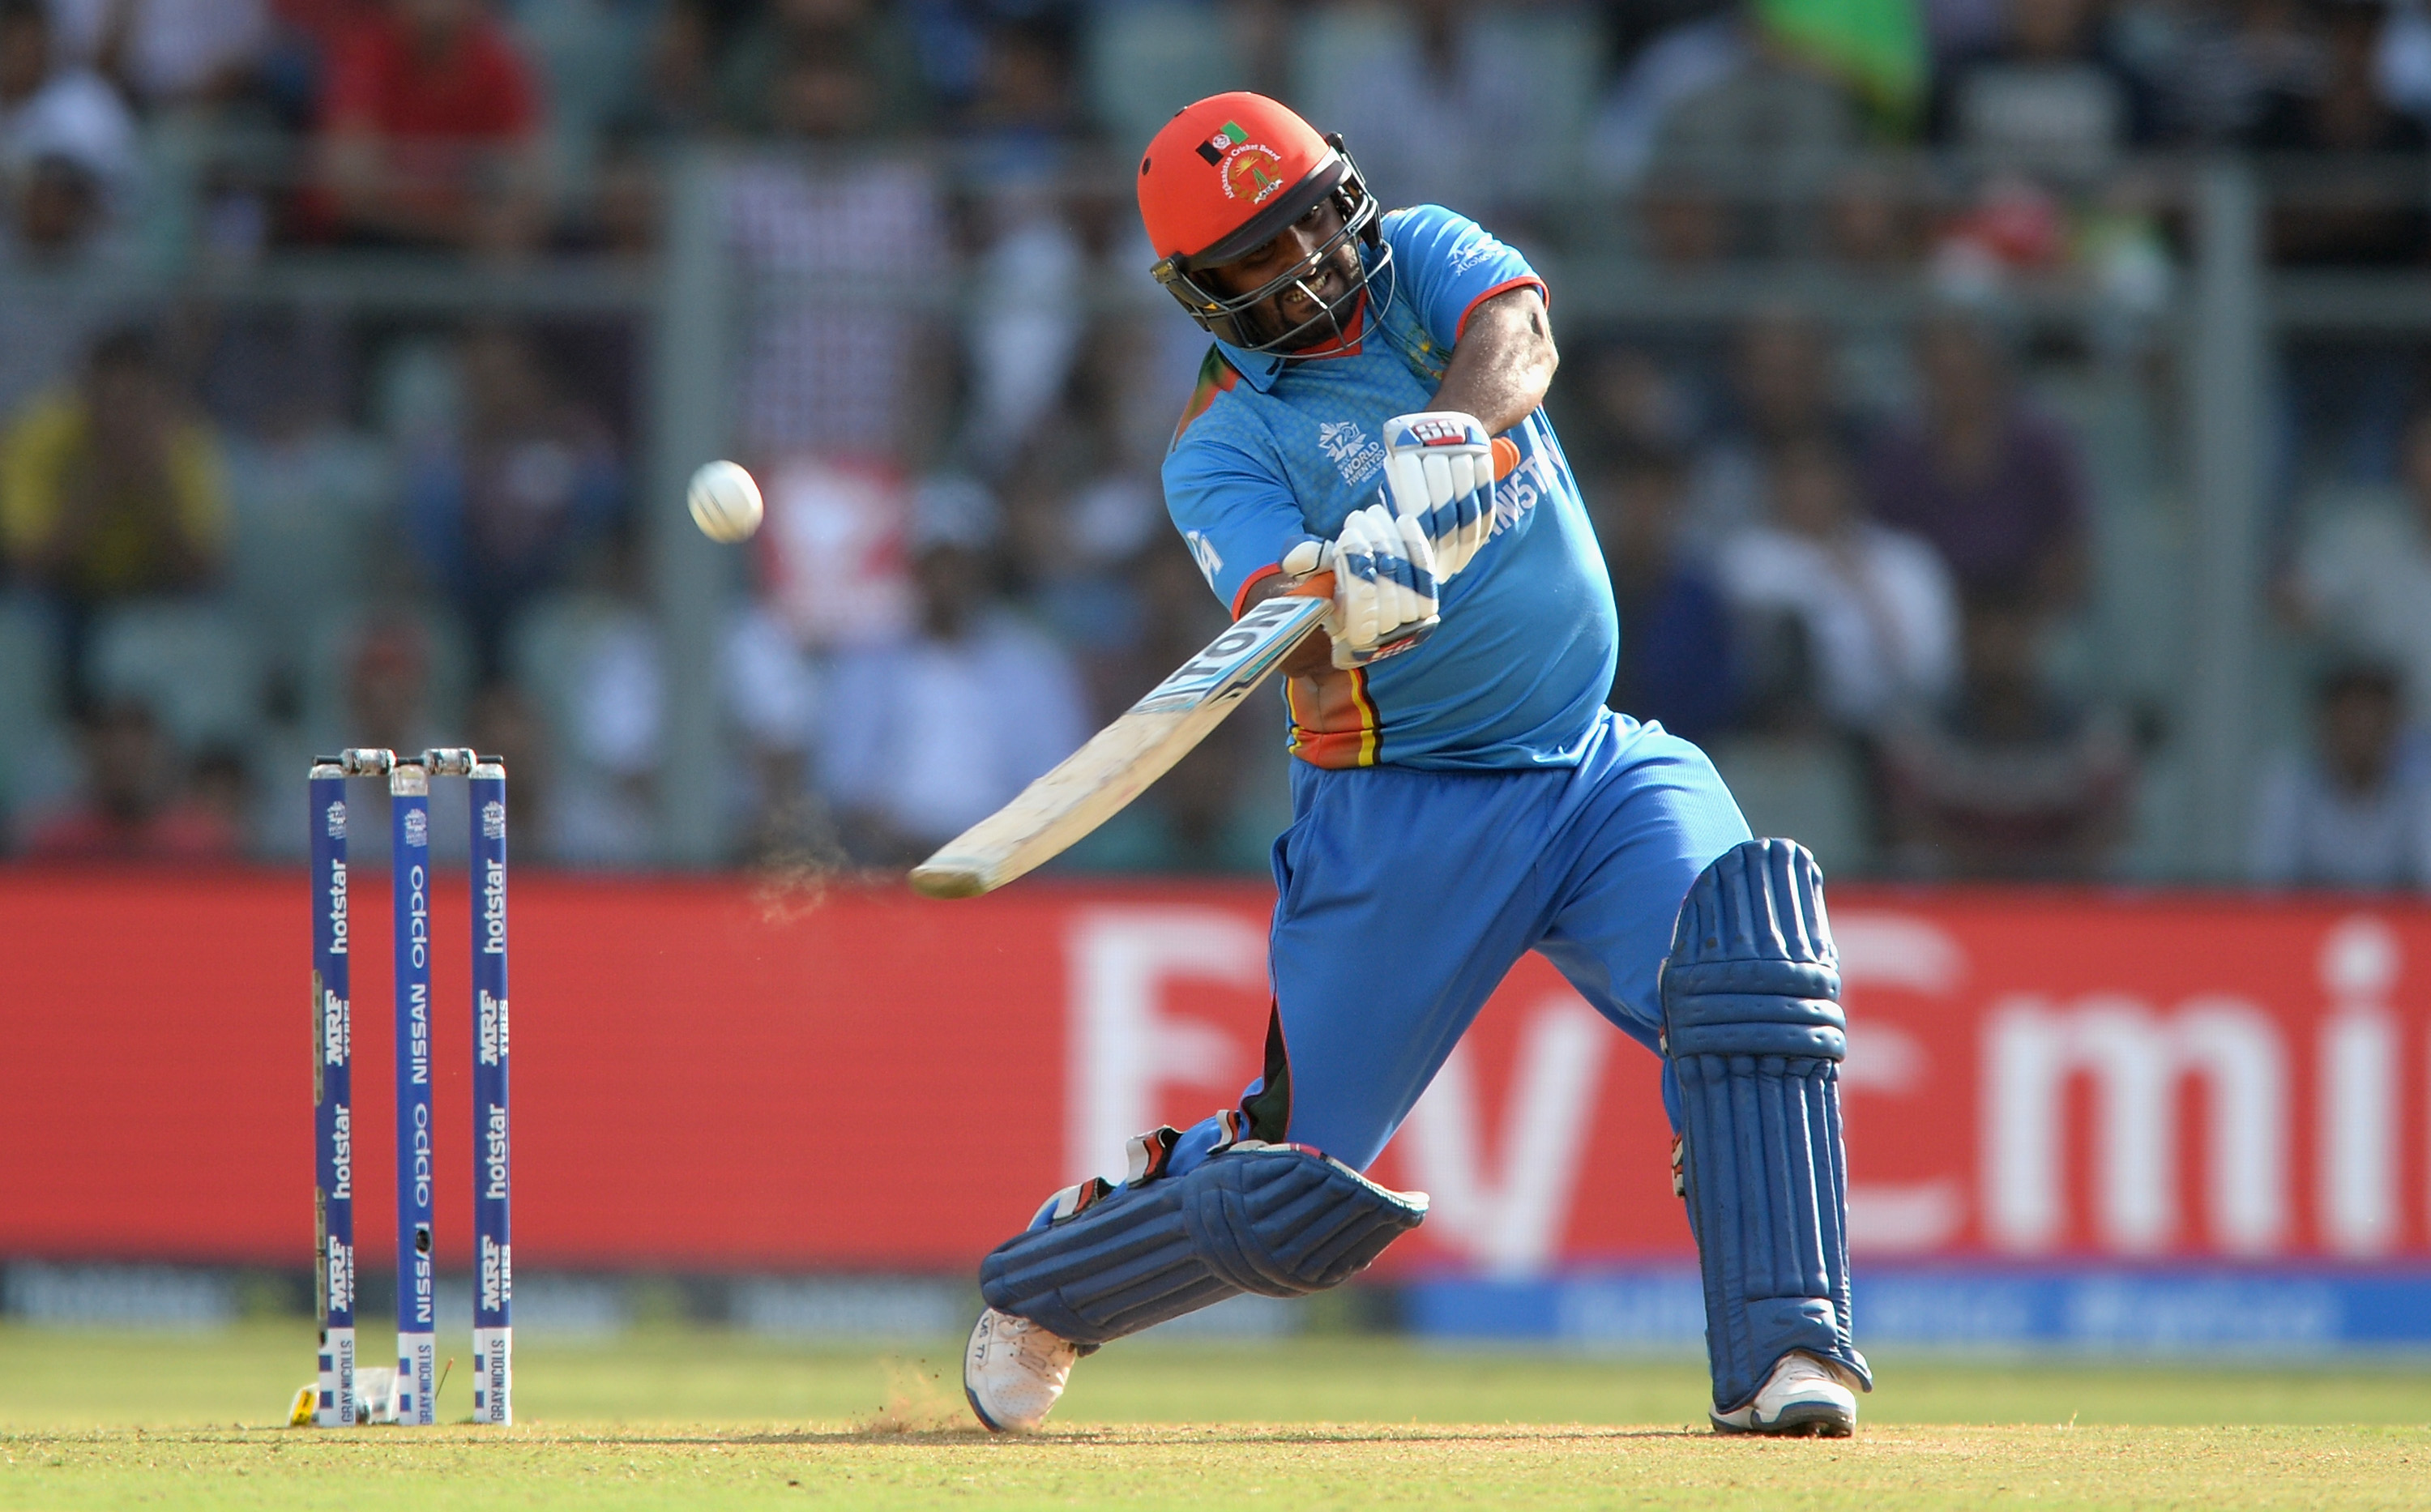 Video | Mohammad Shahzad hits a blistering 74 off 16 deliveries to set a new T10 record